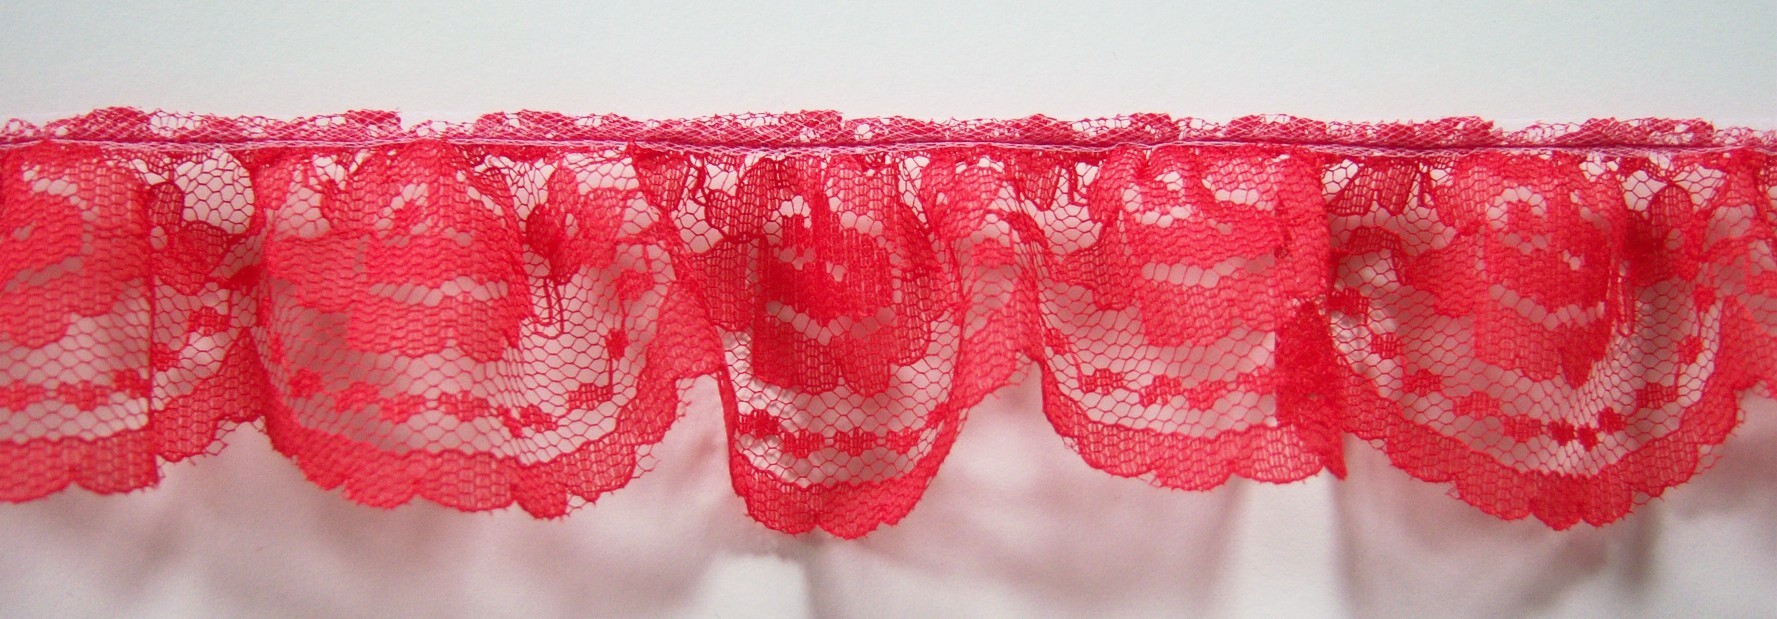 Scarlet Red 2" Ruffled Lace